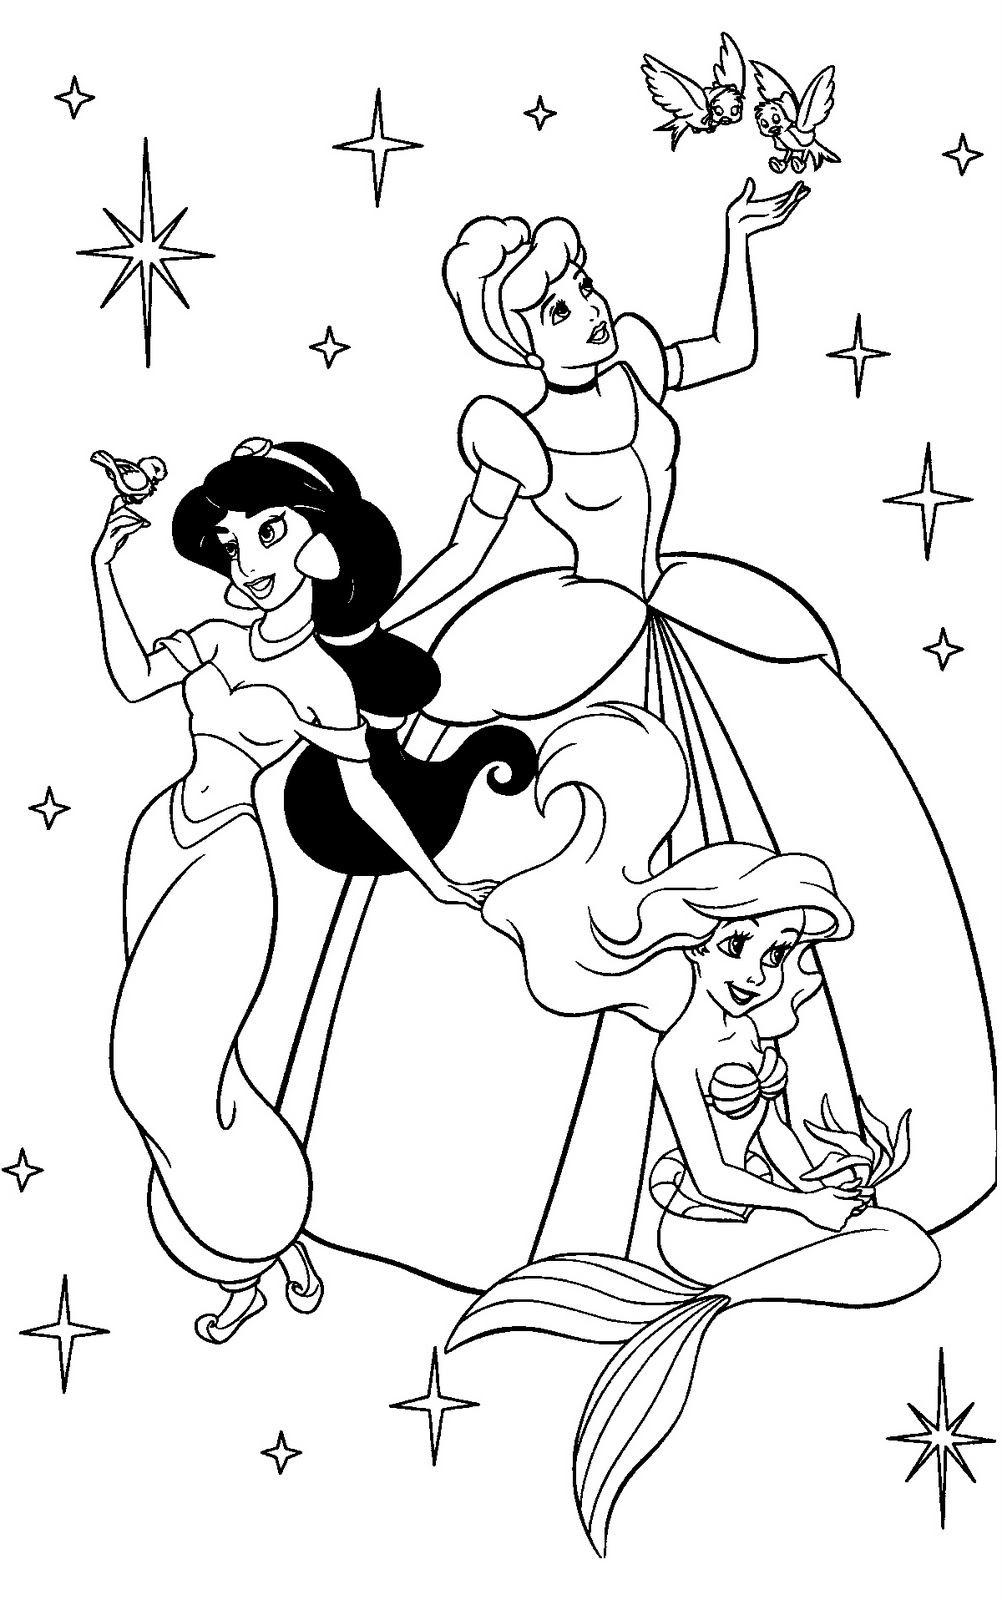 Download Disney Princesses - Best Coloring Pages - Free Coloring ...